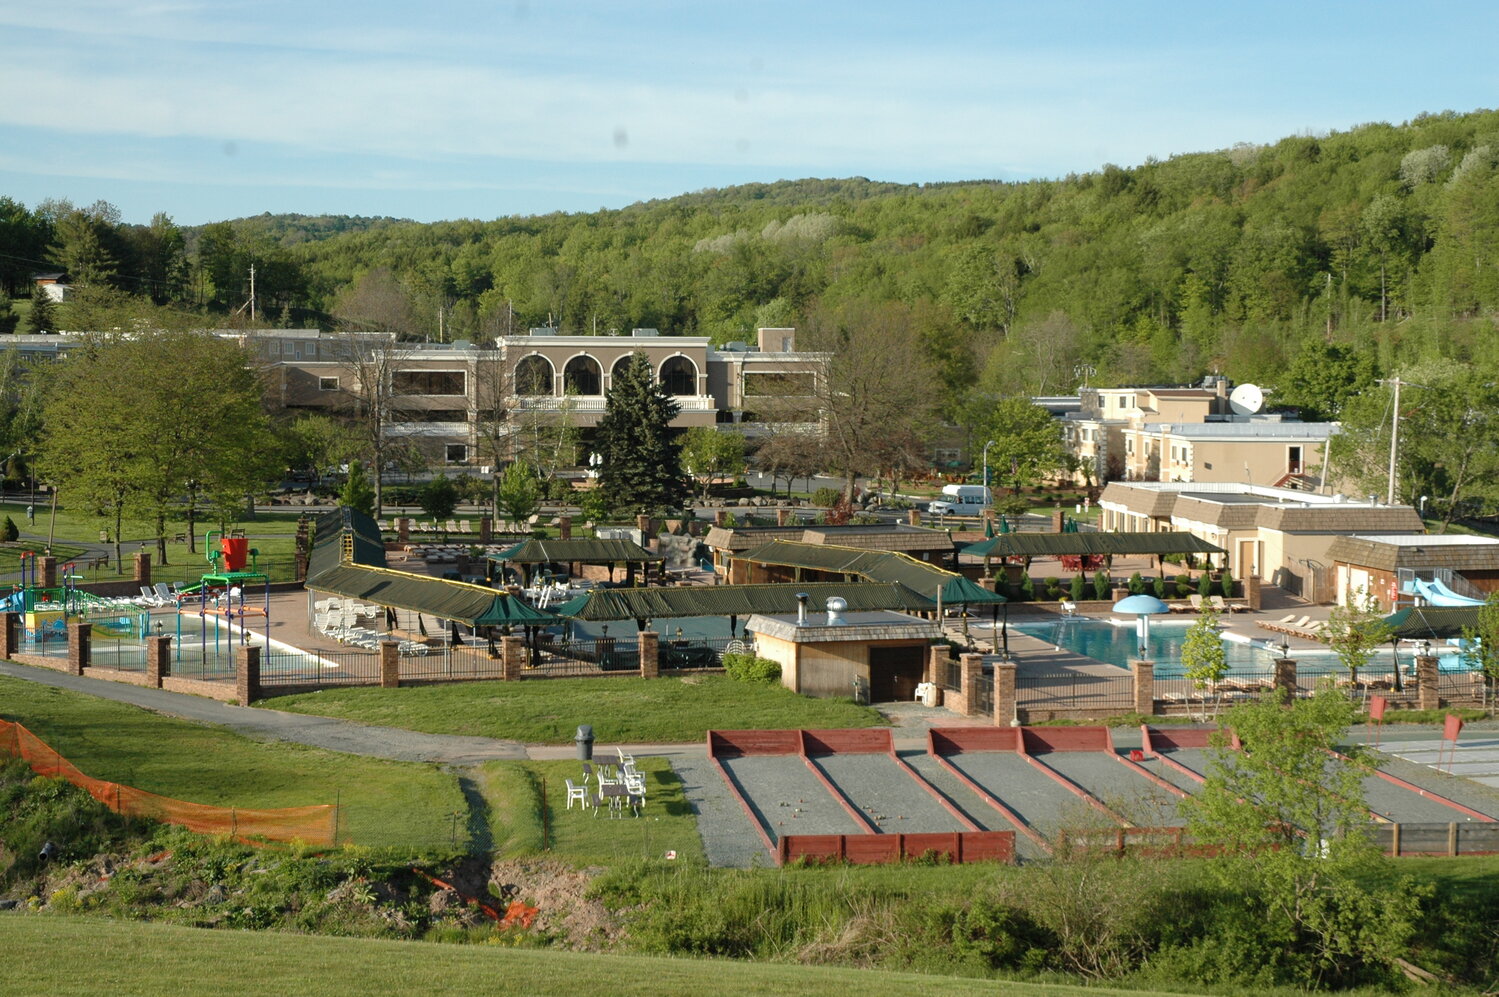 The Villa Roma Resort and Conference Center in Callicoon features five outdoor swimming pools, 18-hole golf course, ski hill, bocce courts, fitness center and many other amenities.